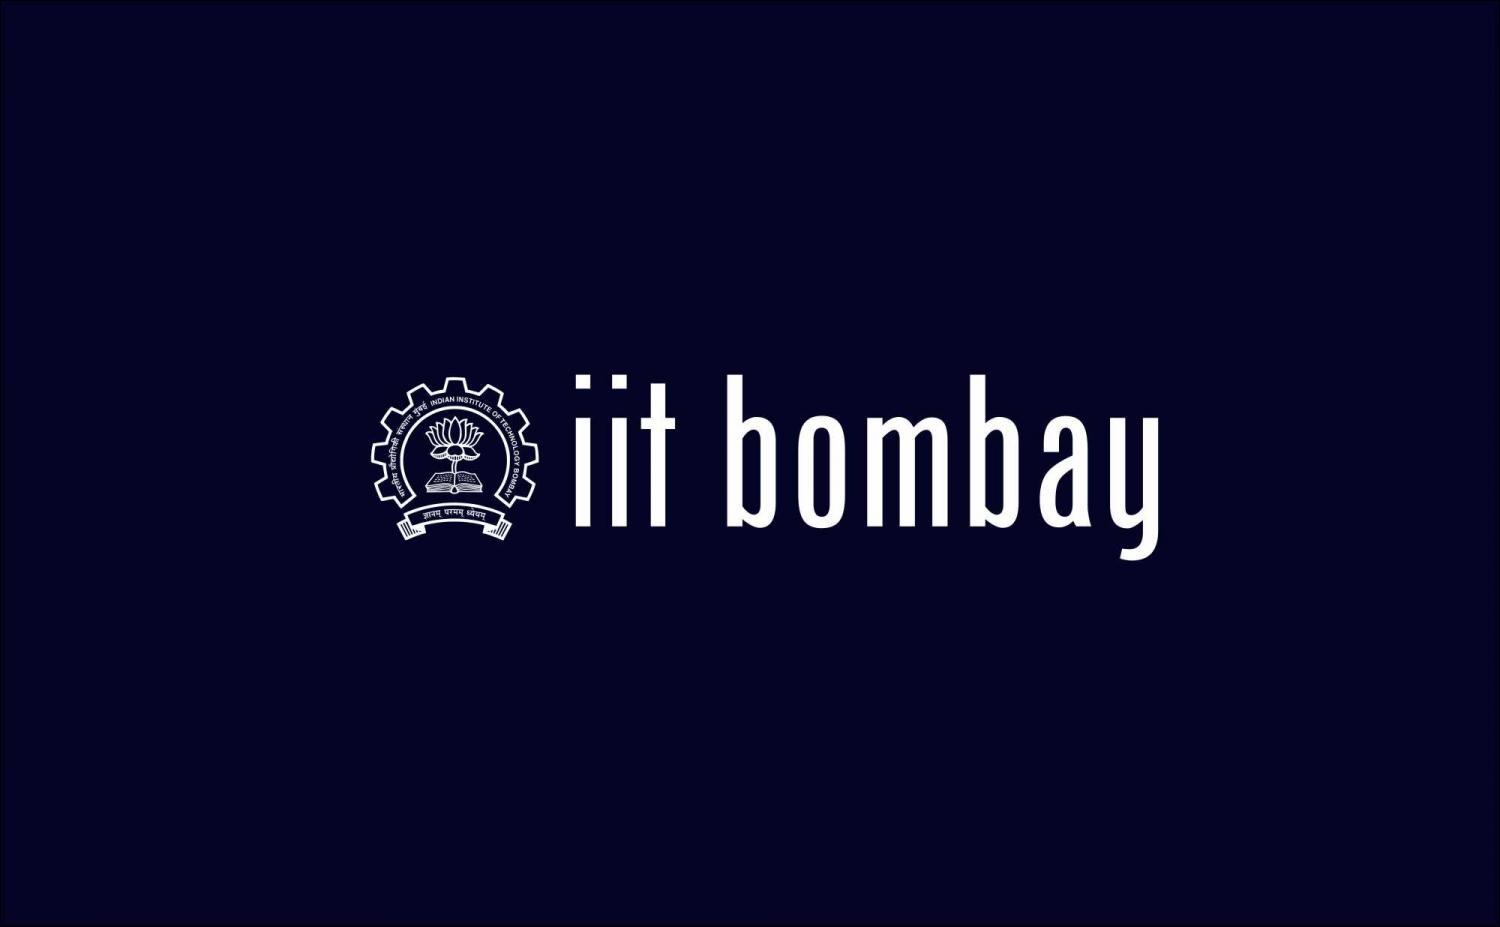 Discover More Than 63 Iit Bombay Hd Wallpapers Super Hot - 3tdesign.edu.vn